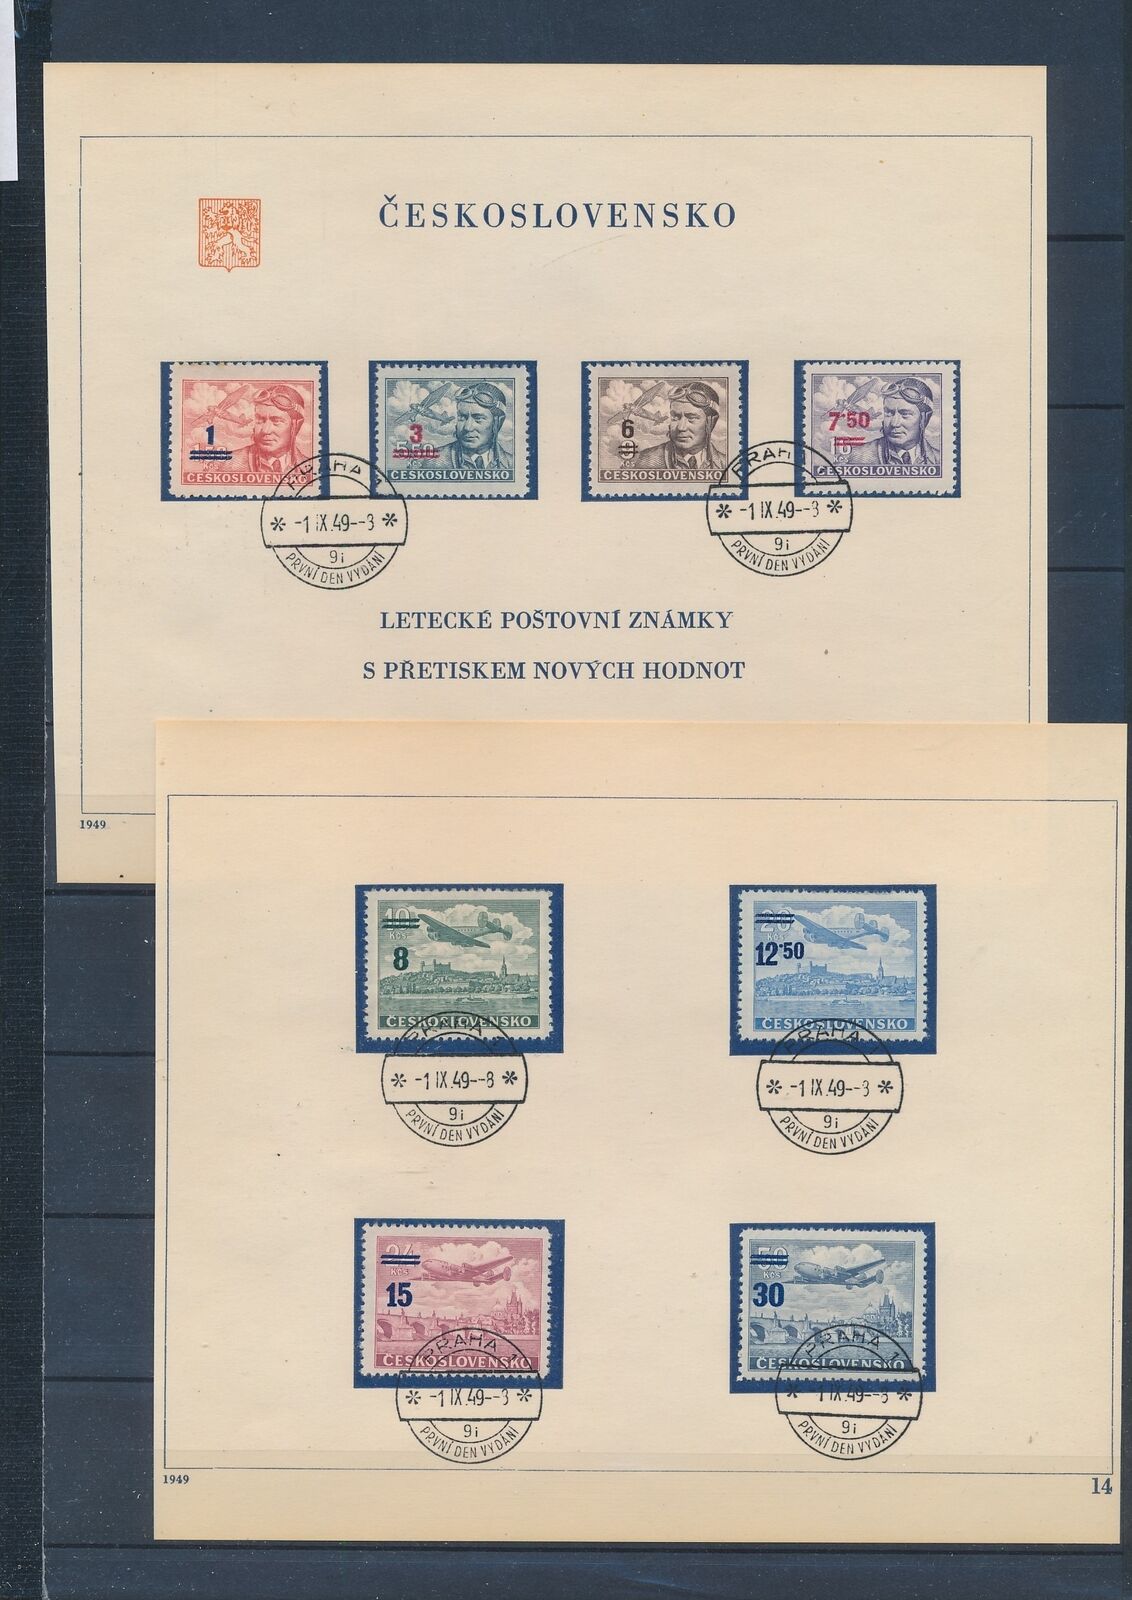 XC87574 Czechoslovakia 1949 overprint airmail stamps FDC cancel used